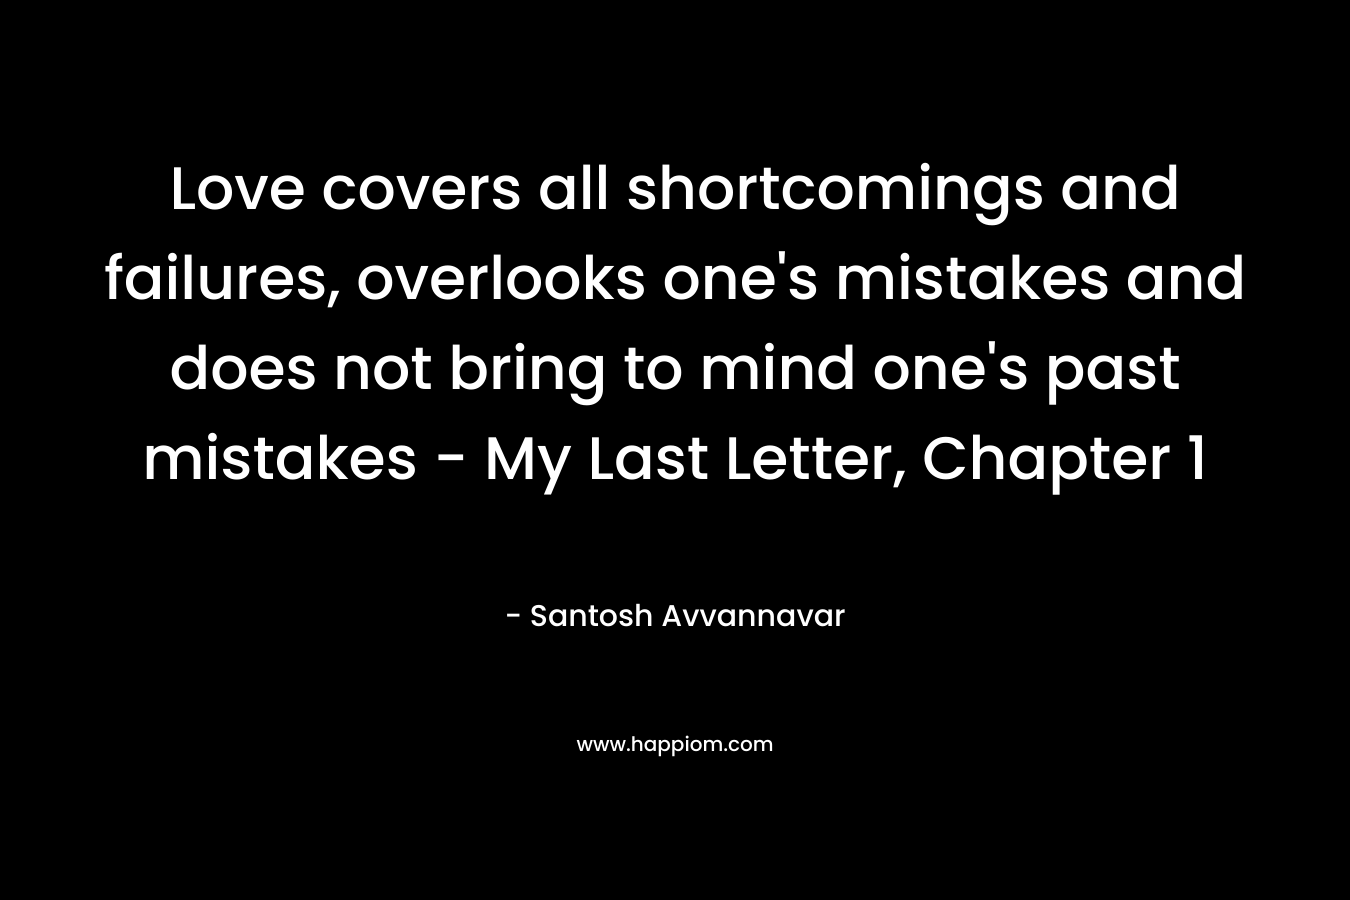 Love covers all shortcomings and failures, overlooks one’s mistakes and does not bring to mind one’s past mistakes – My Last Letter, Chapter 1 – Santosh Avvannavar